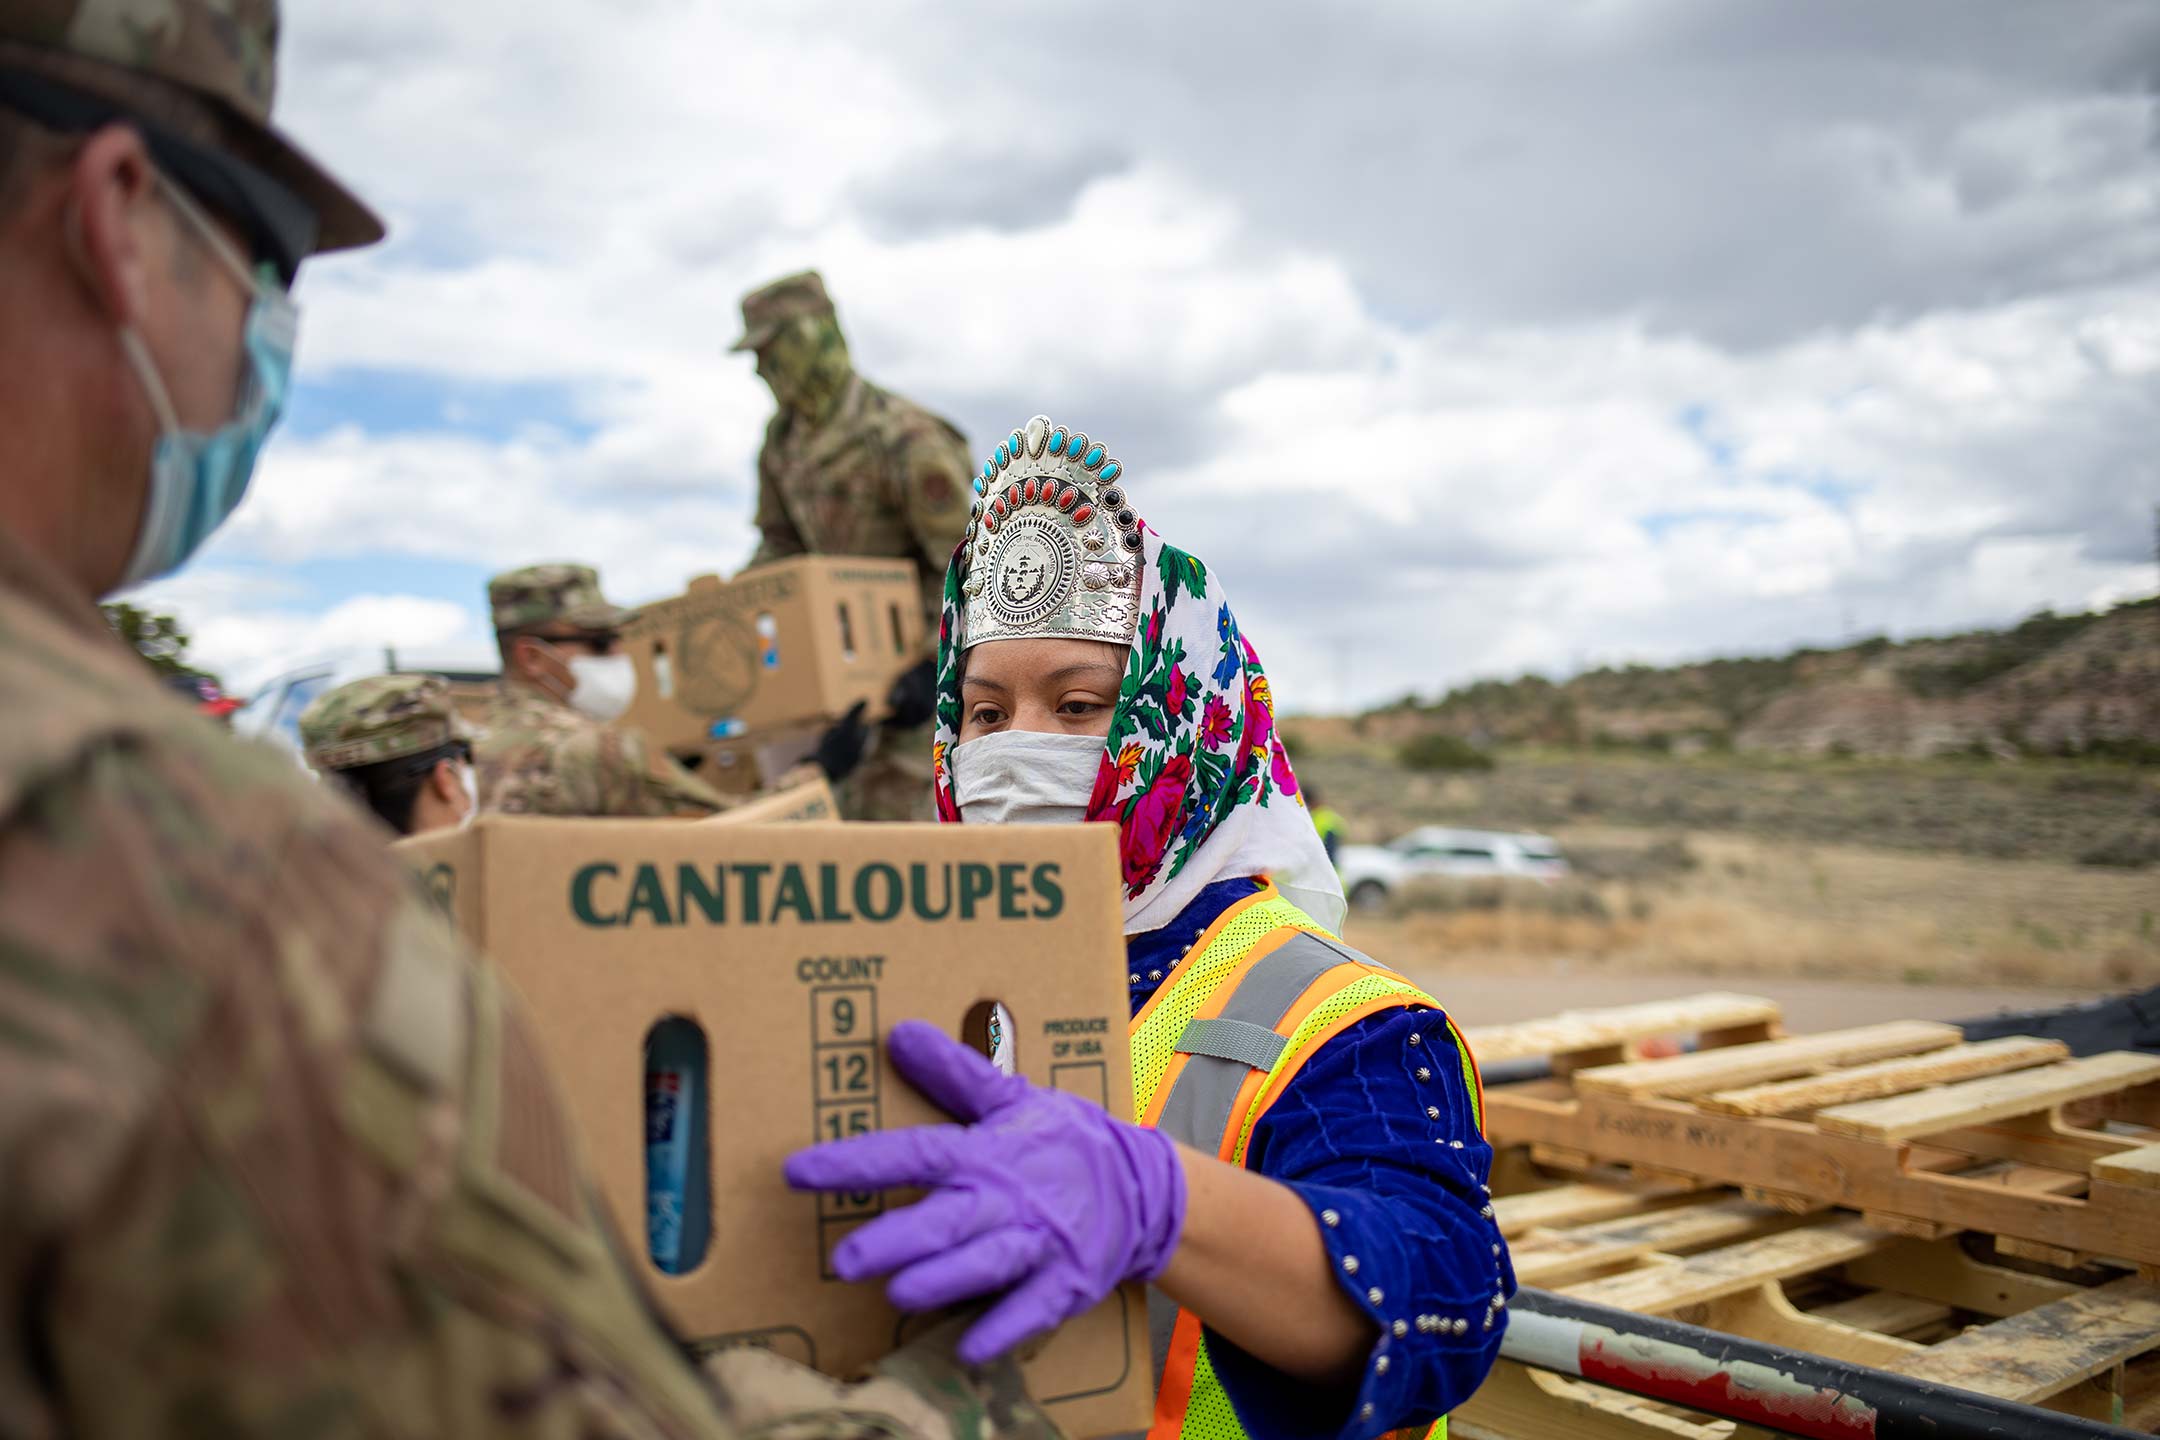 a woman in a traditional navajo headdress and wearing purple gloves and a neon yellow work vest over her clothes accepts a box of food from a soldier.